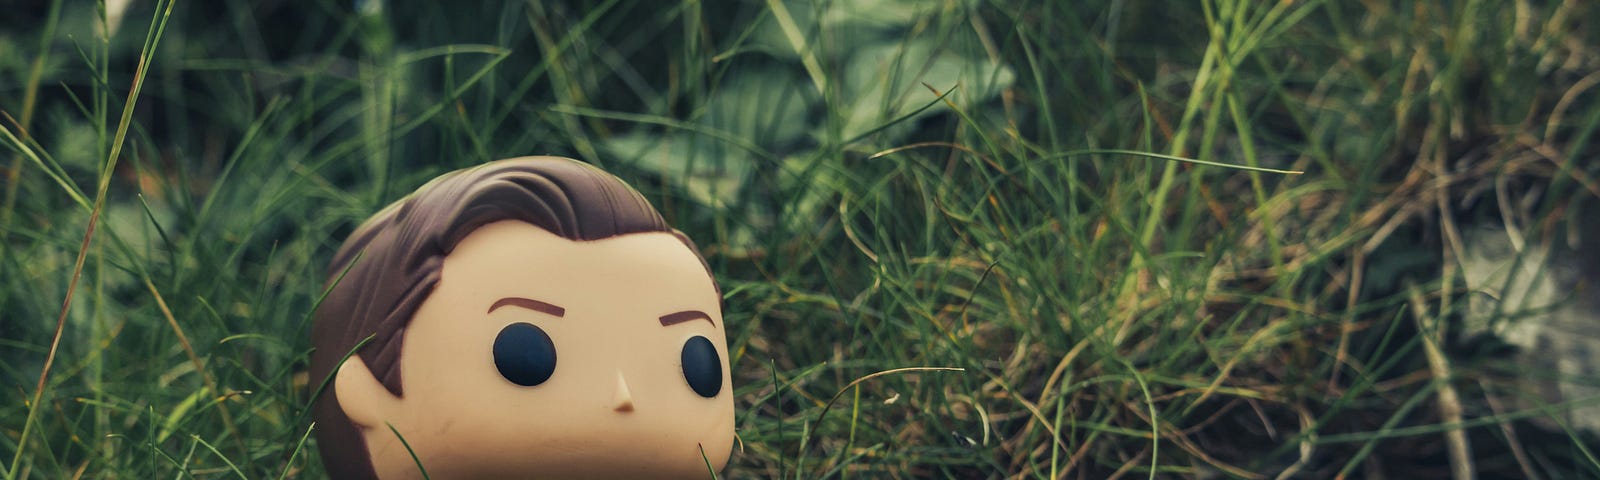 A Captain Kirk figure in the grass